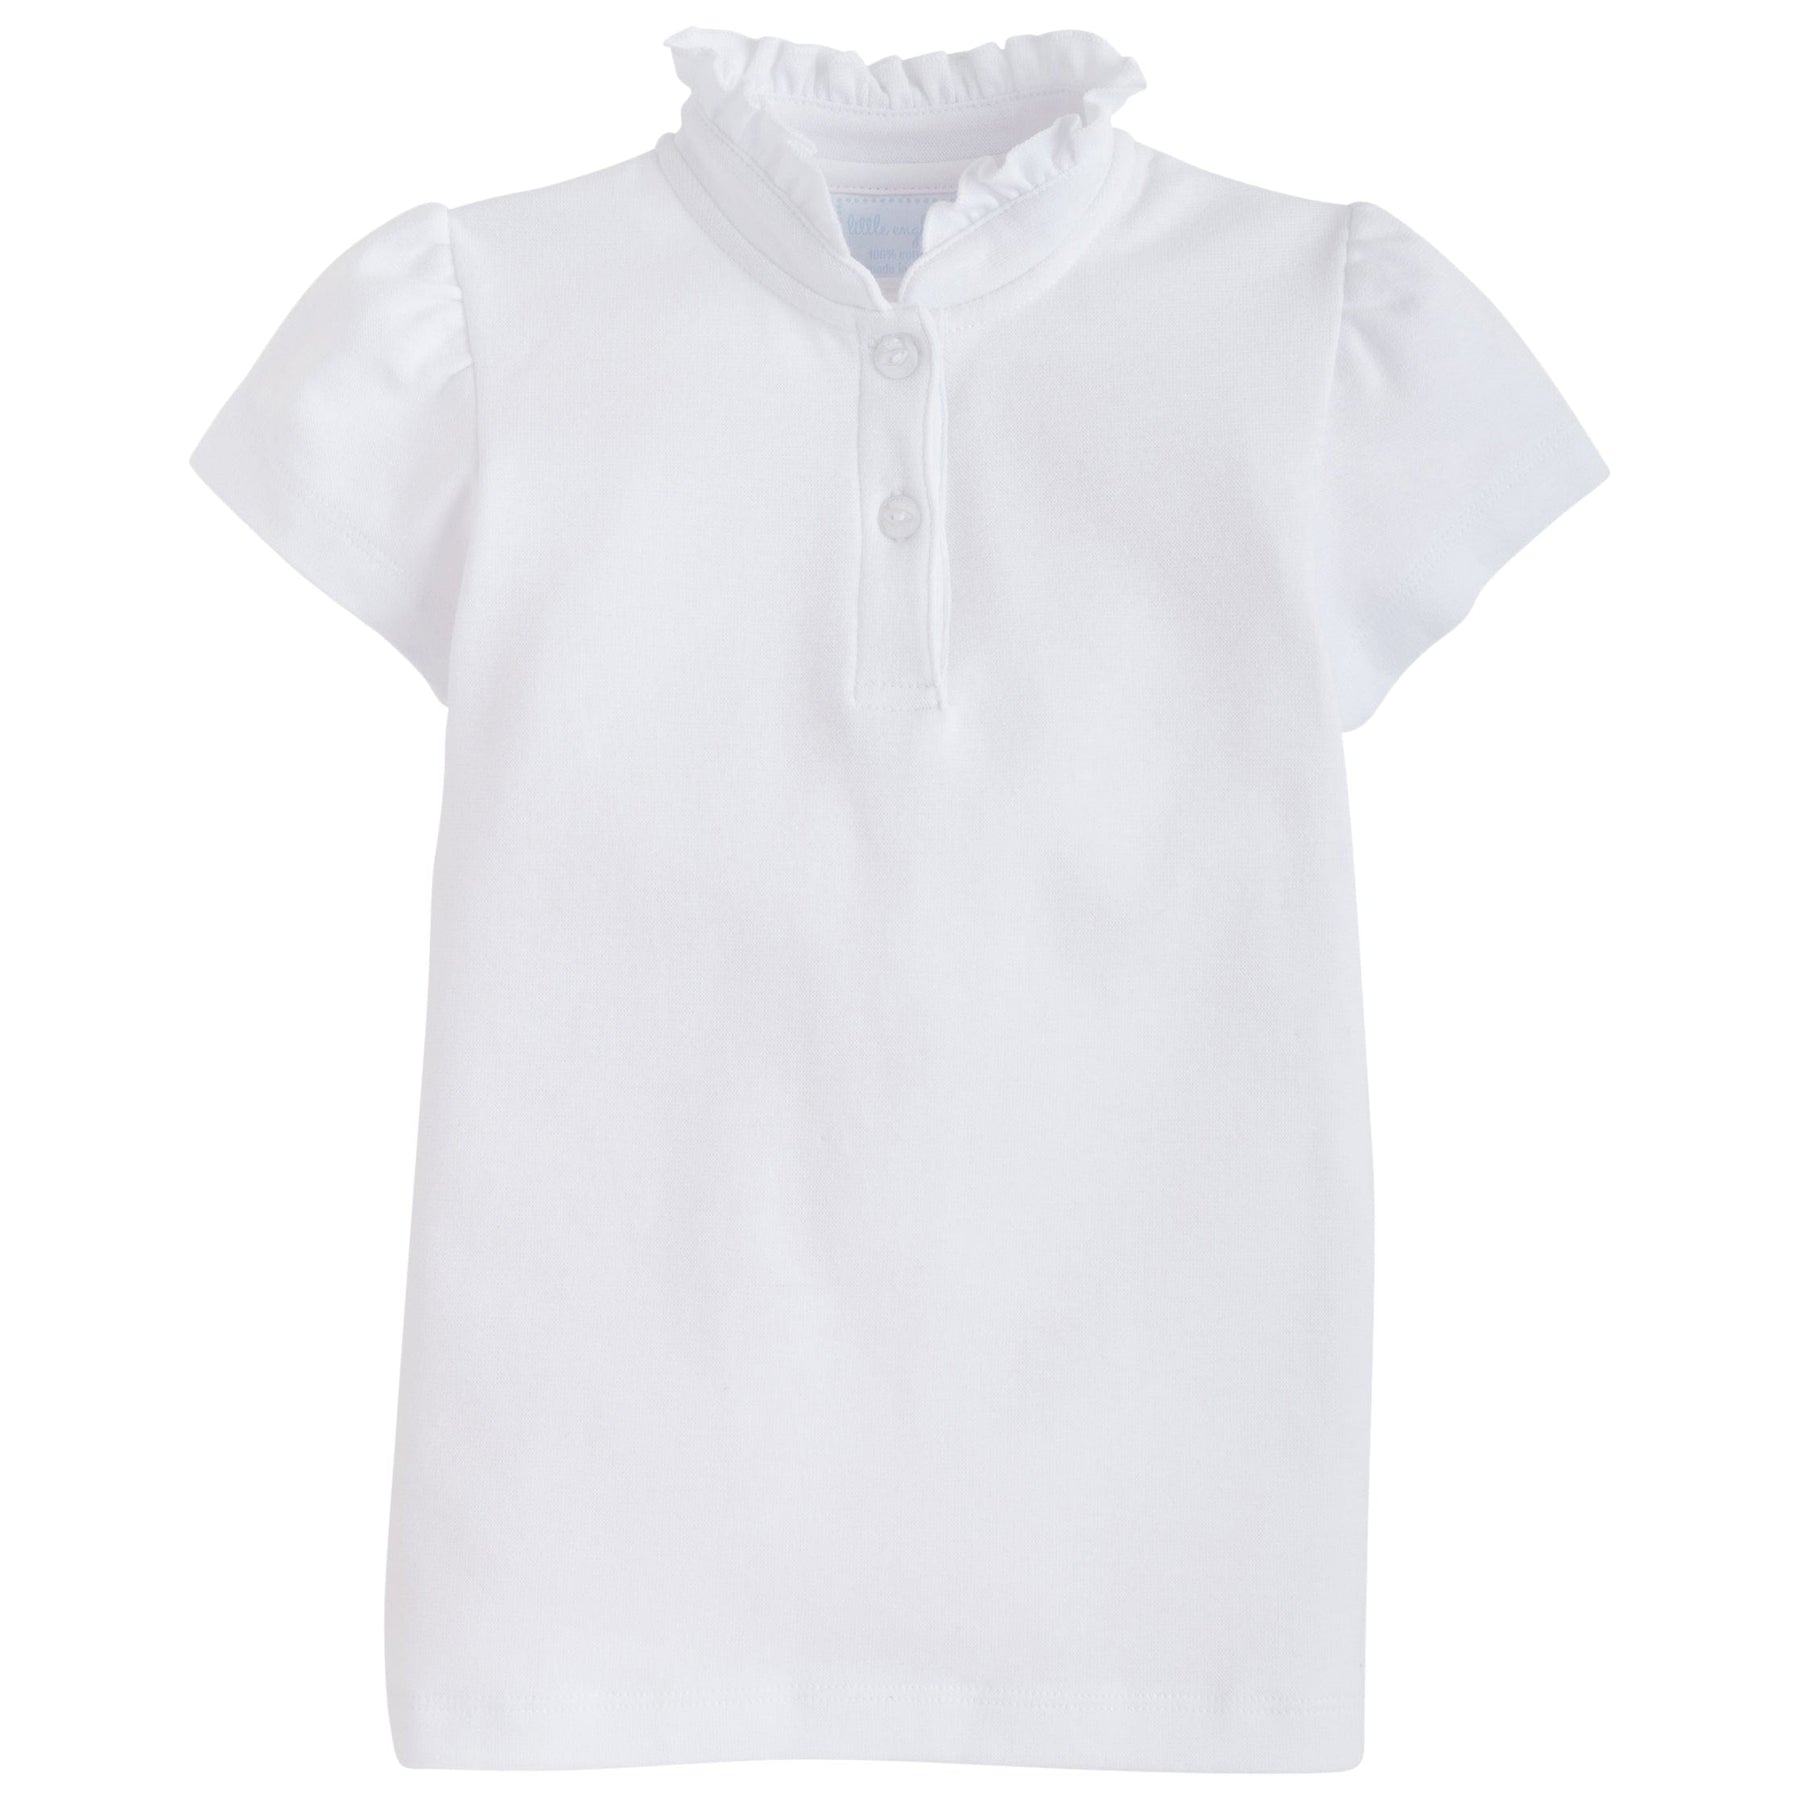 seguridadindustrialcr classic childrens clothing girls white polo with ruffle collar